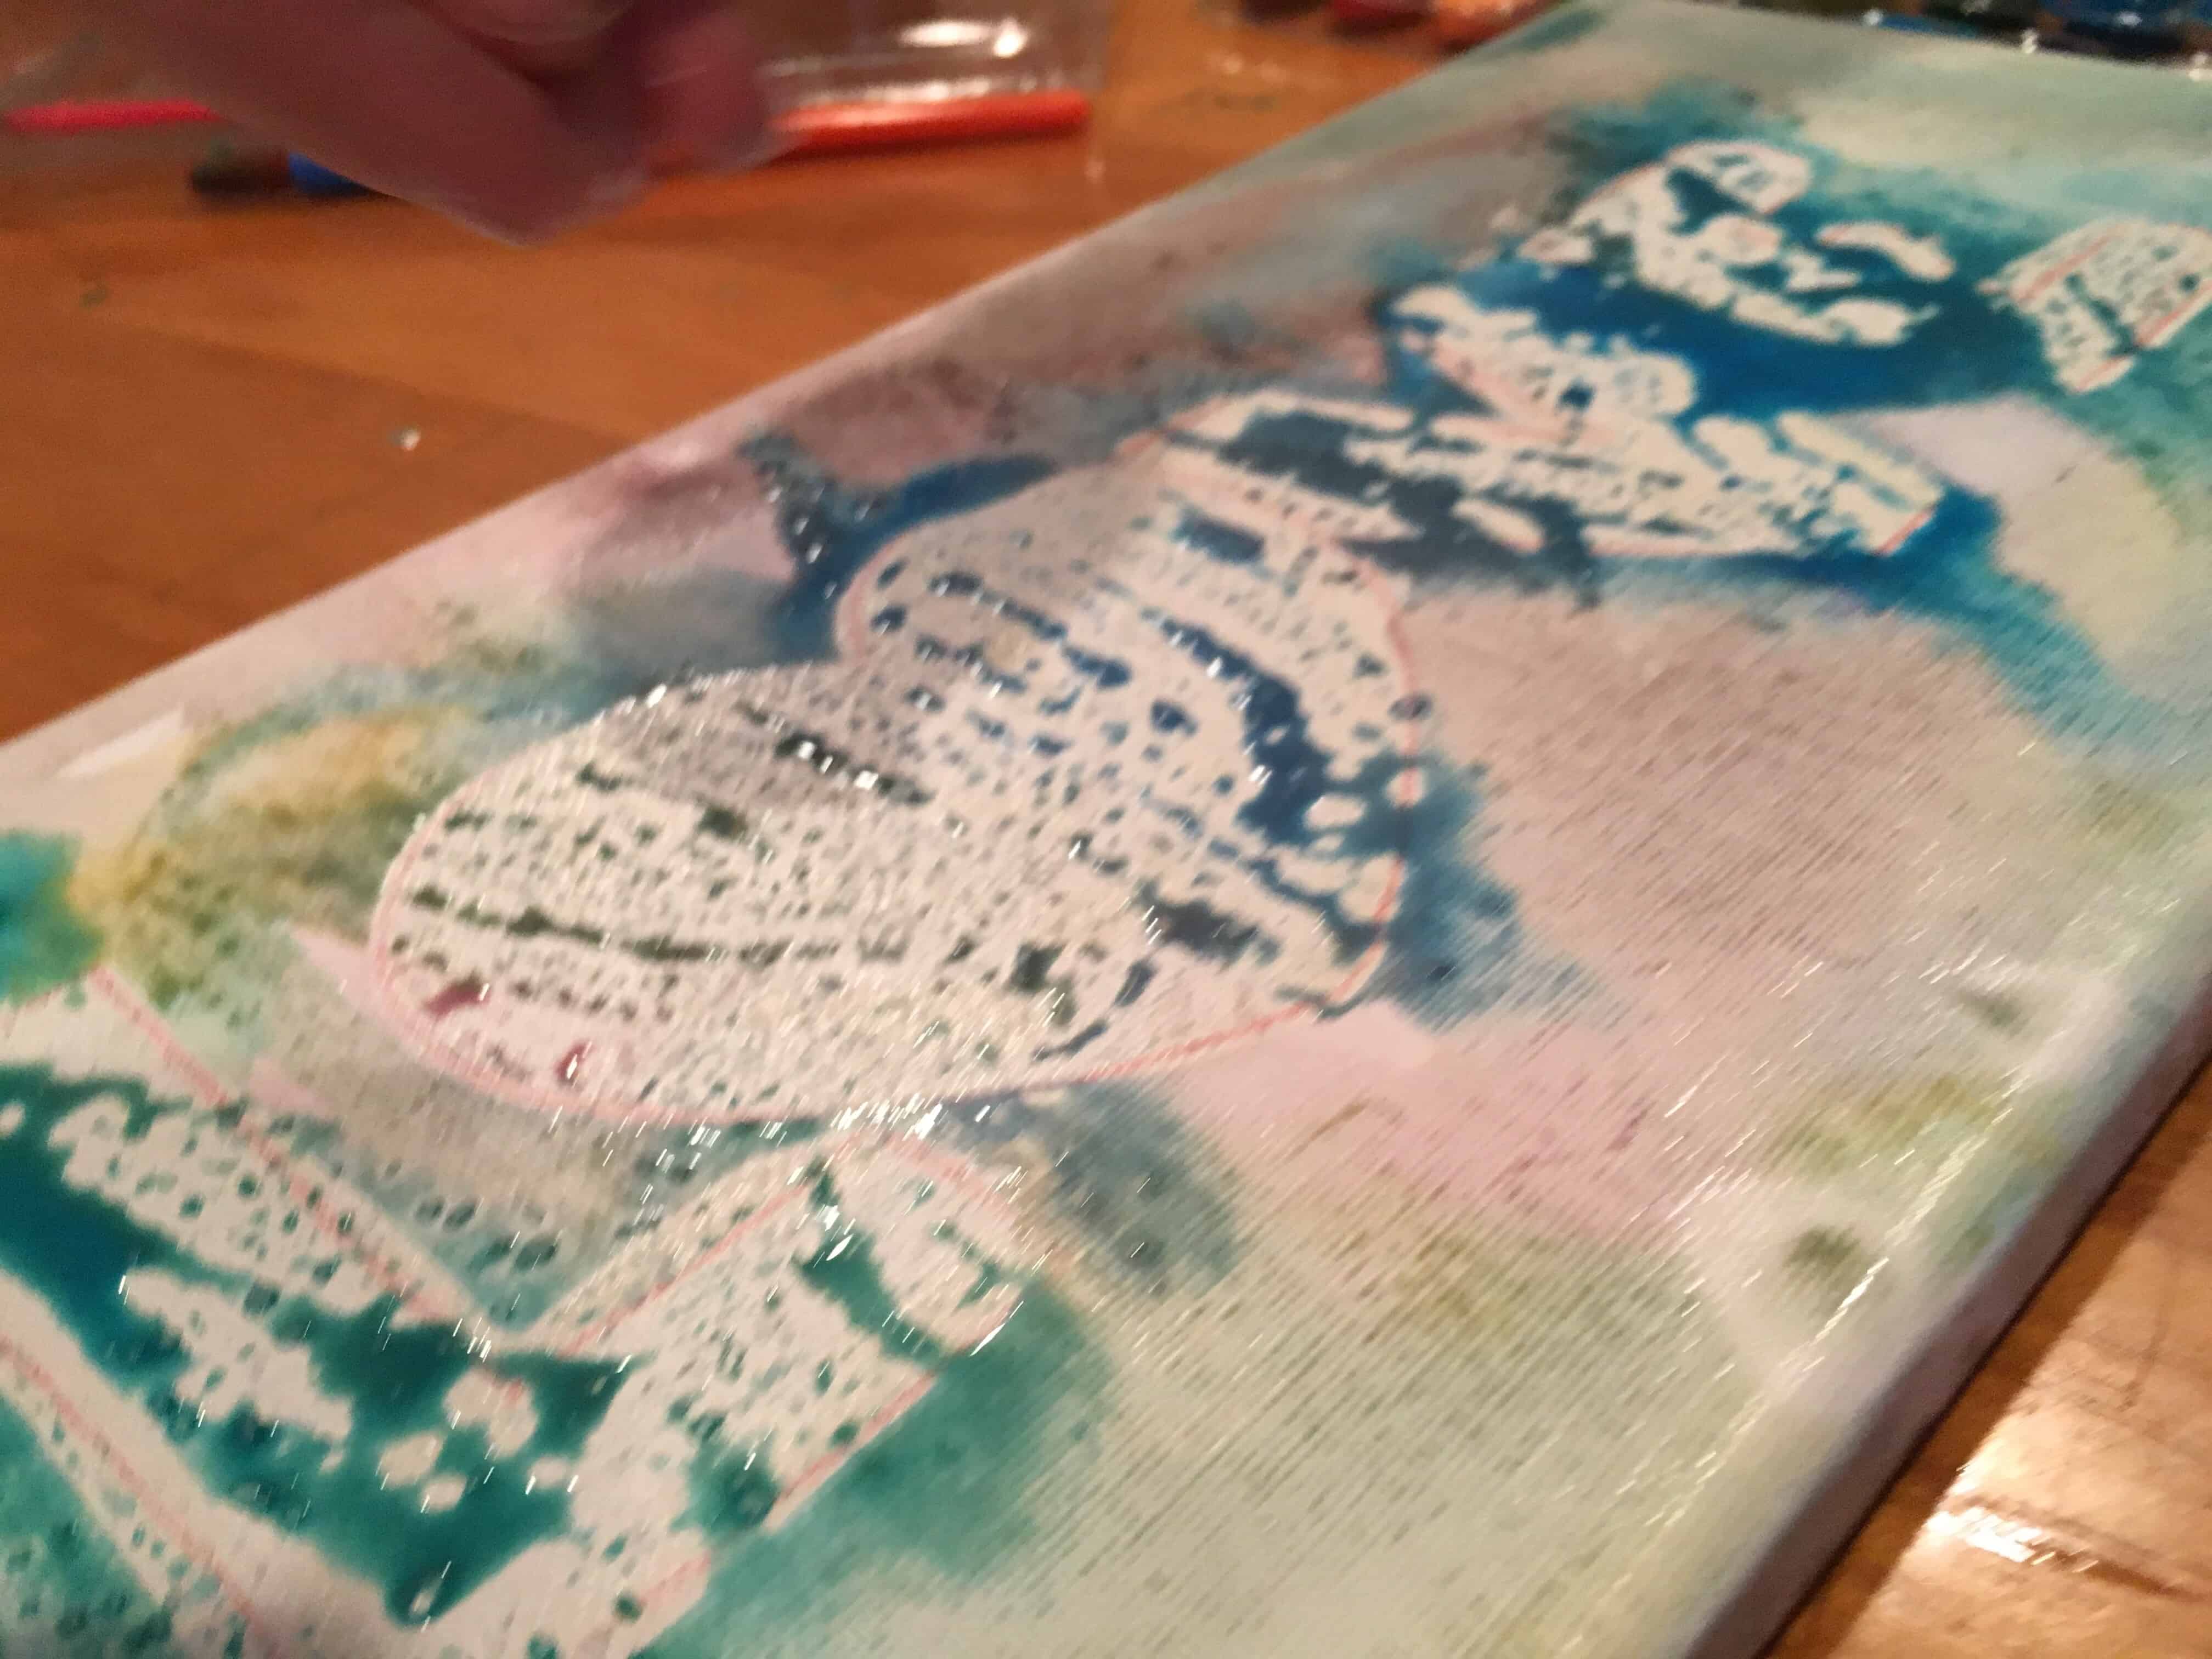 Use rubber cement to make a resist art design on a canvas. Paint with watercolors and sprinkle coarse salt on it when wet to create this BEAUTIFUL artwork